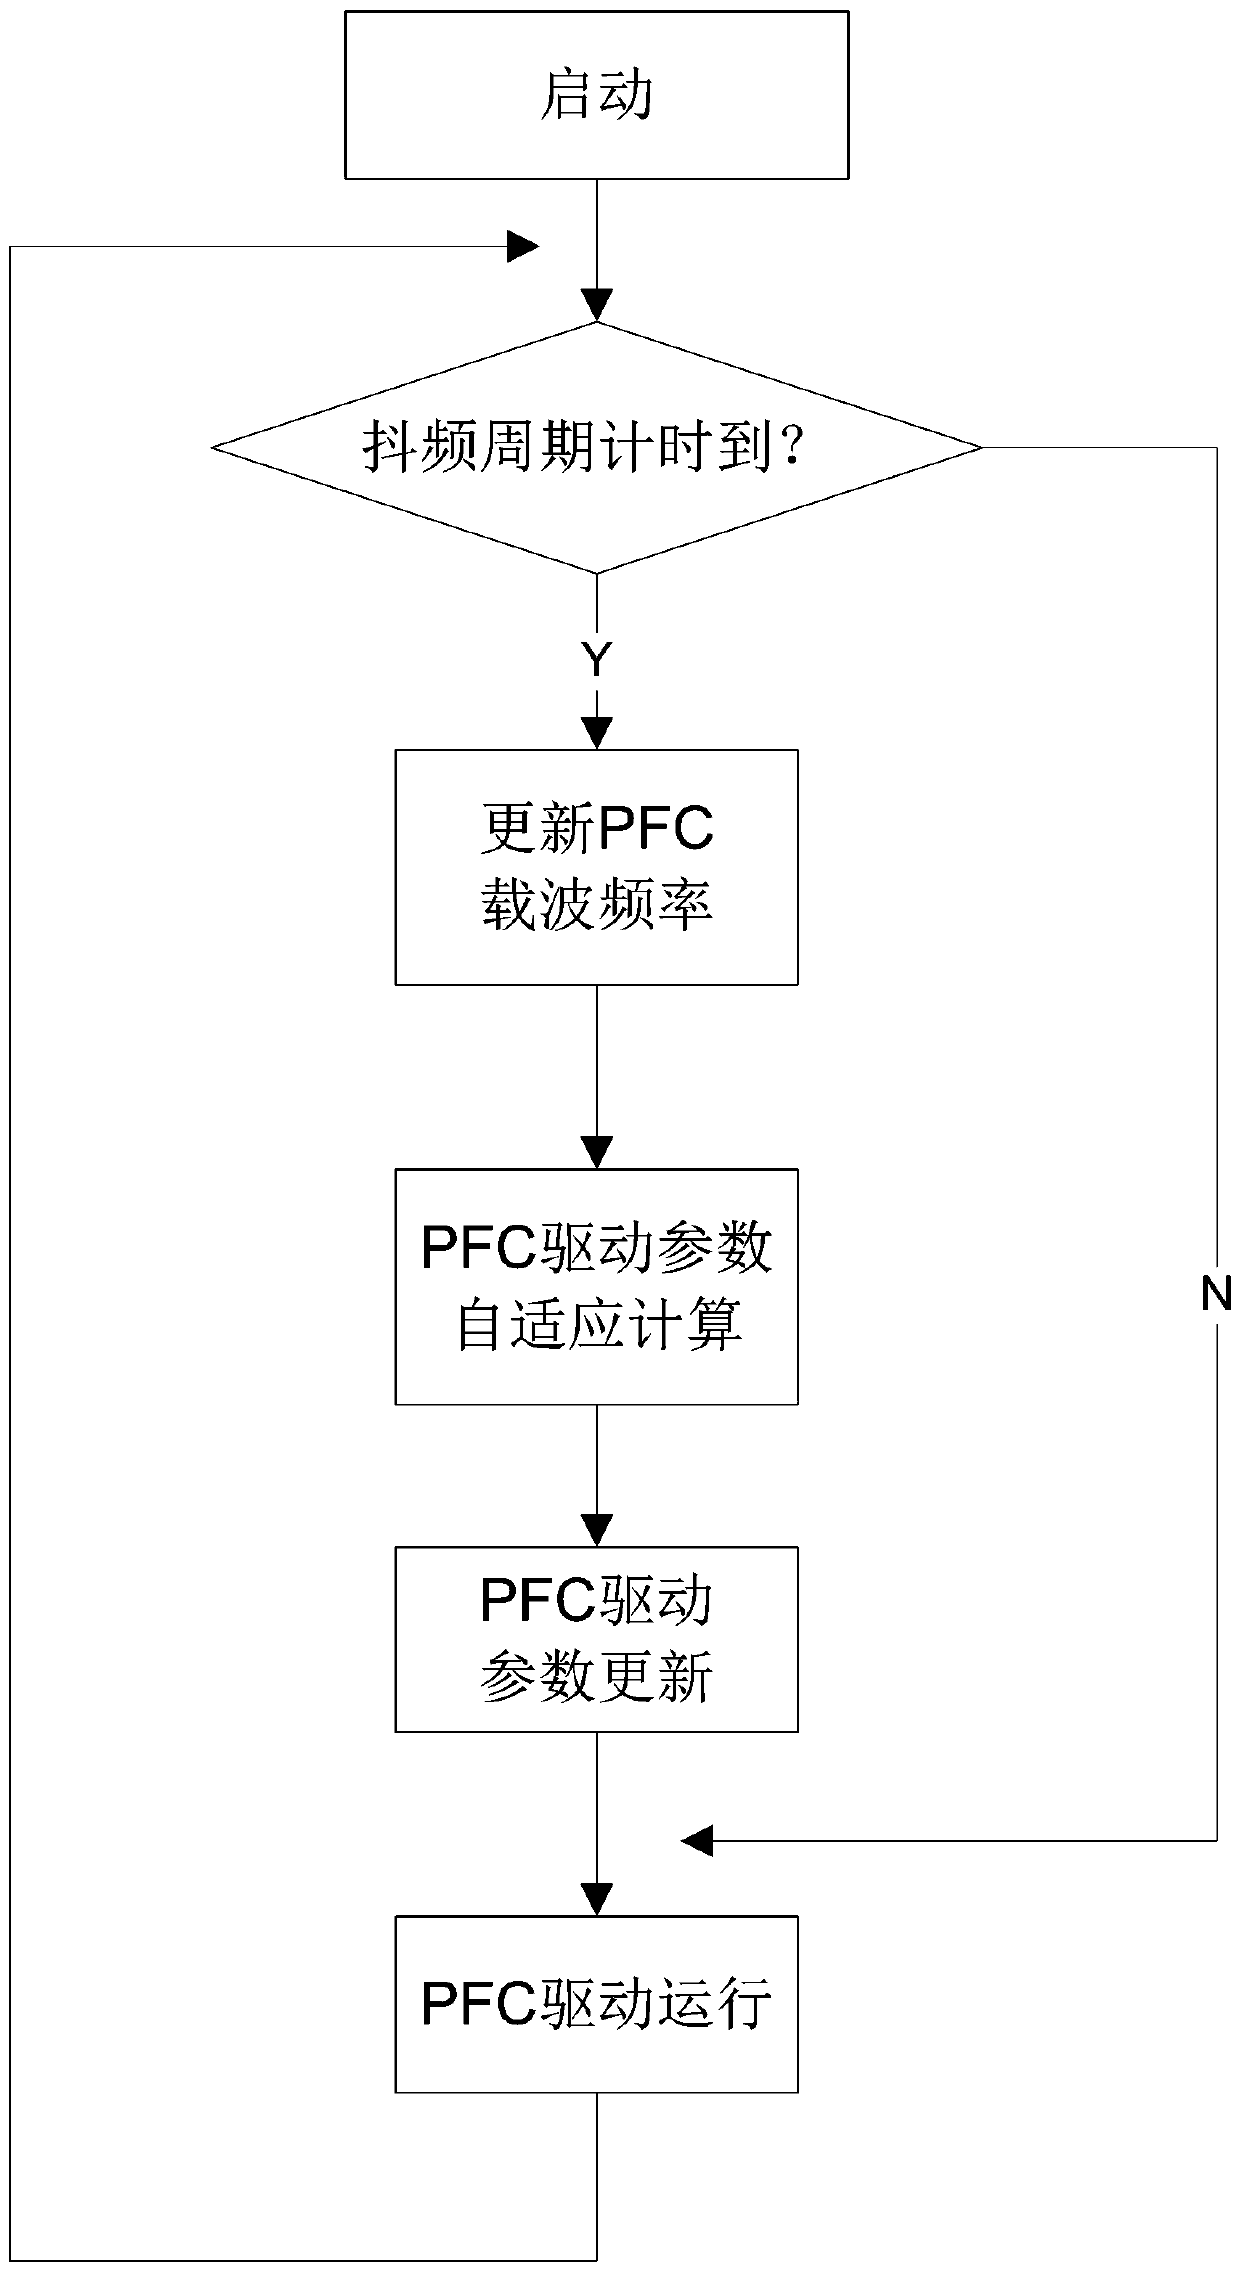 PFC jitter frequency control method and system, and electric appliance